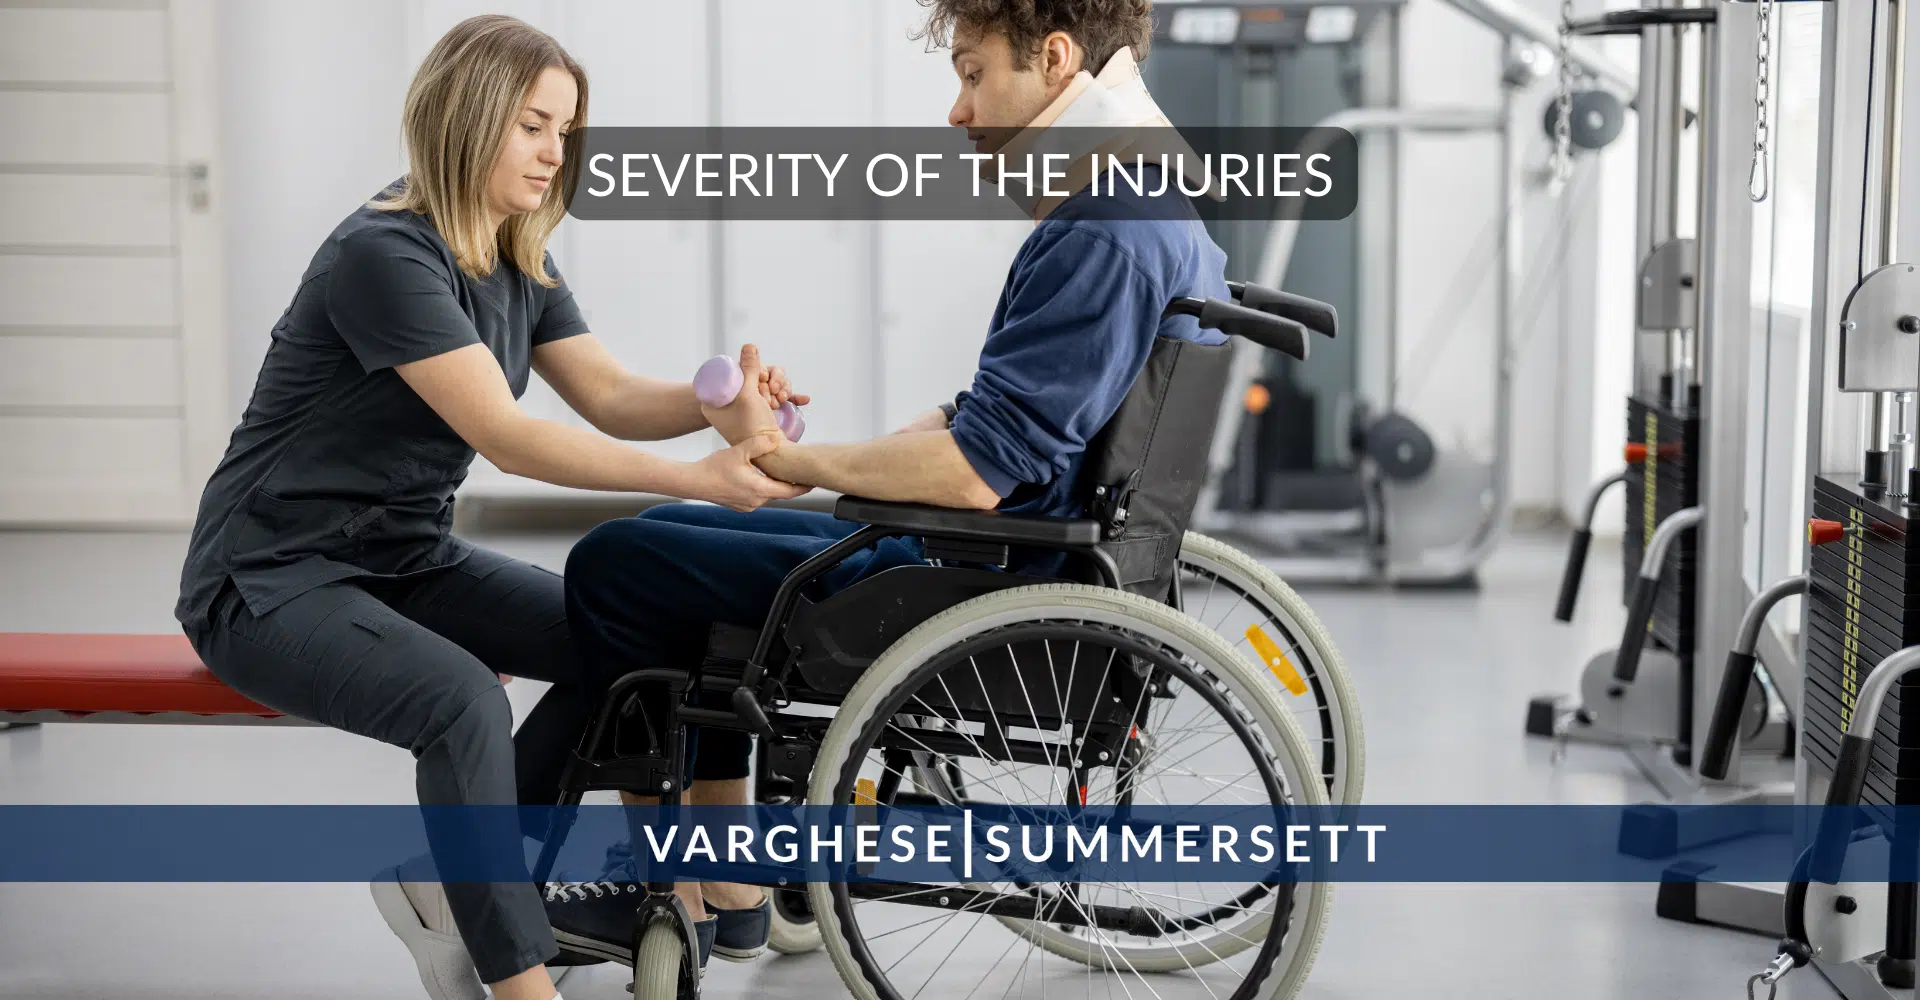 Severity of the Injuries